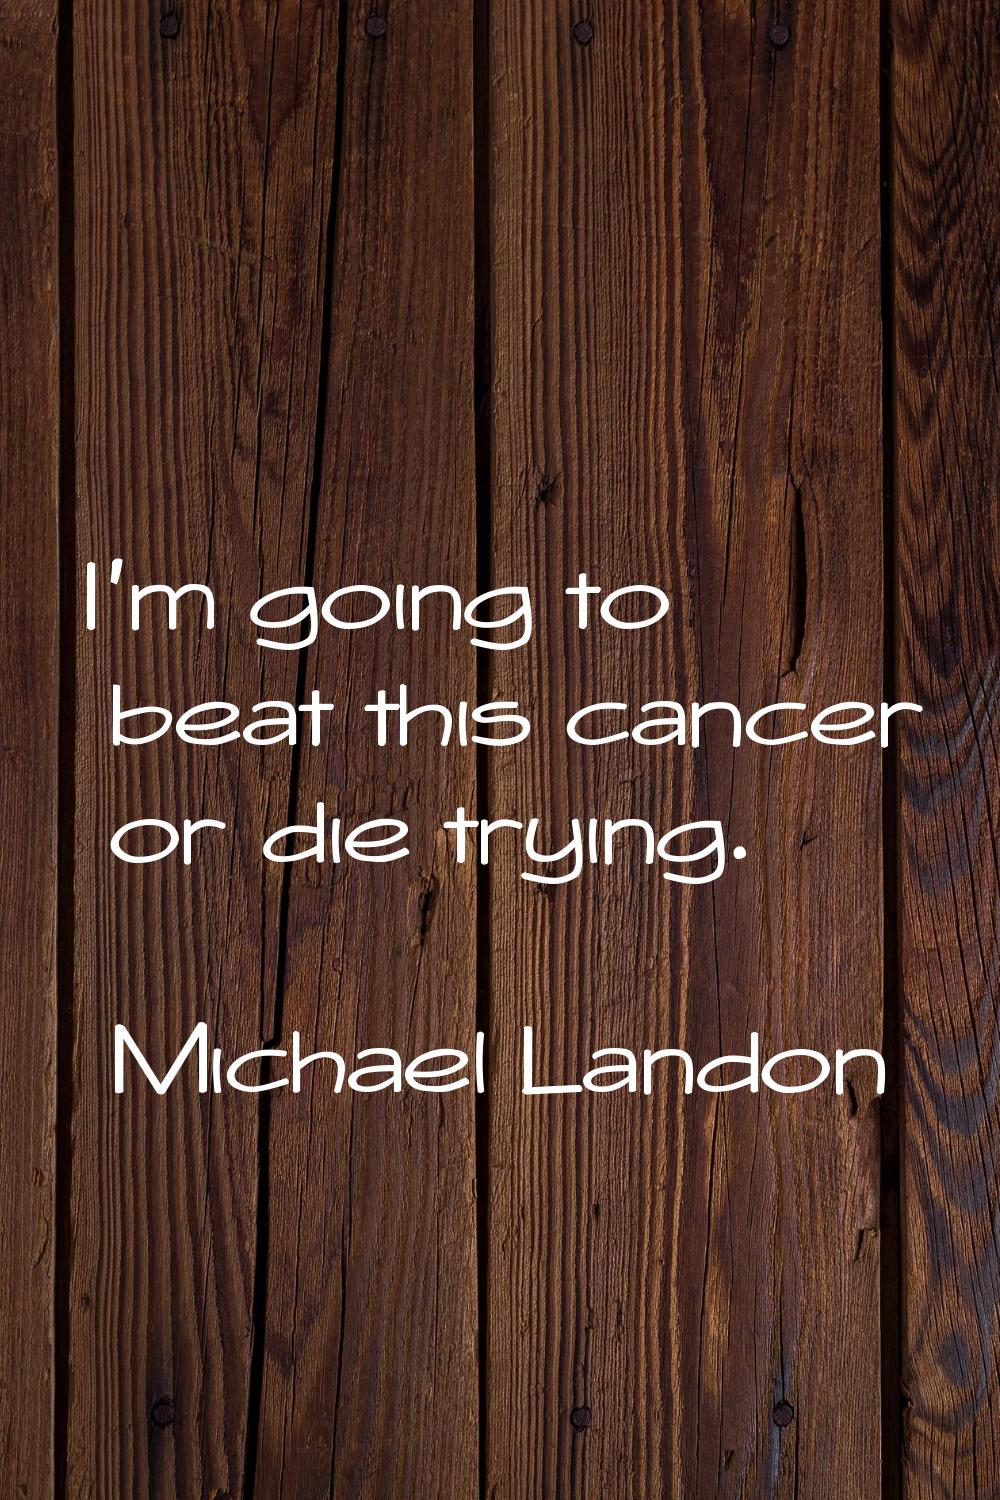 I'm going to beat this cancer or die trying.